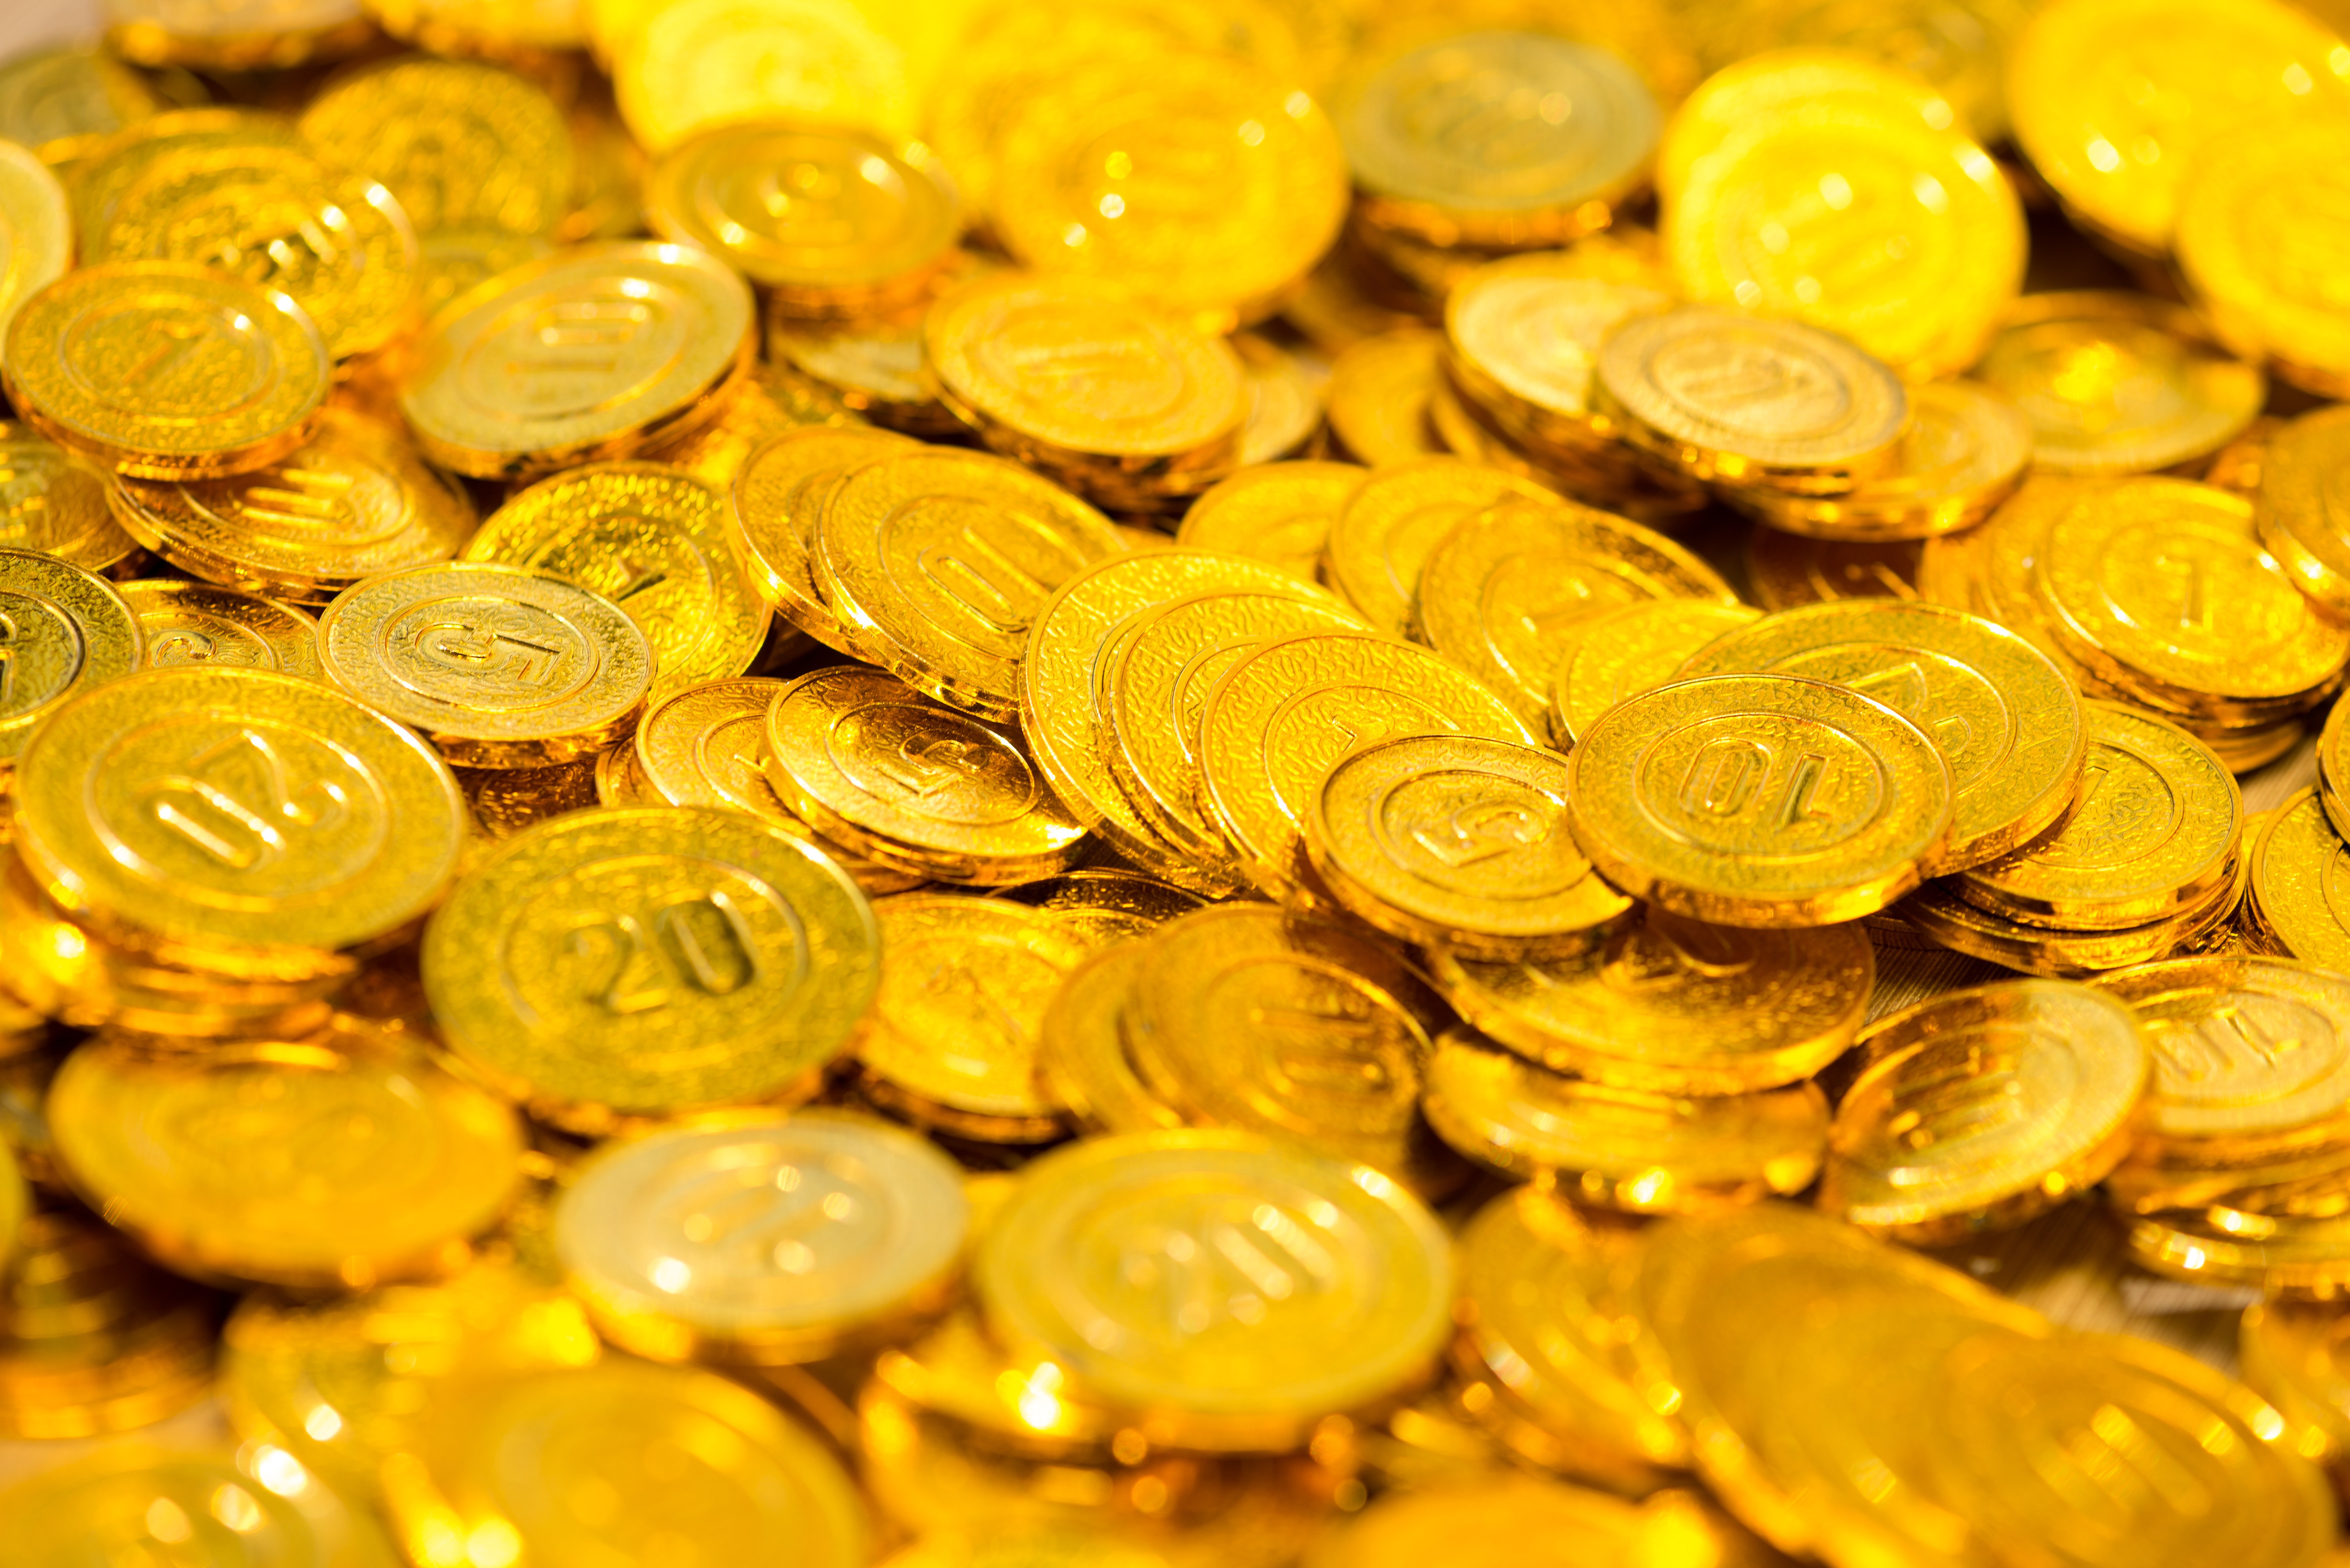 Gold coins | usaCommerce